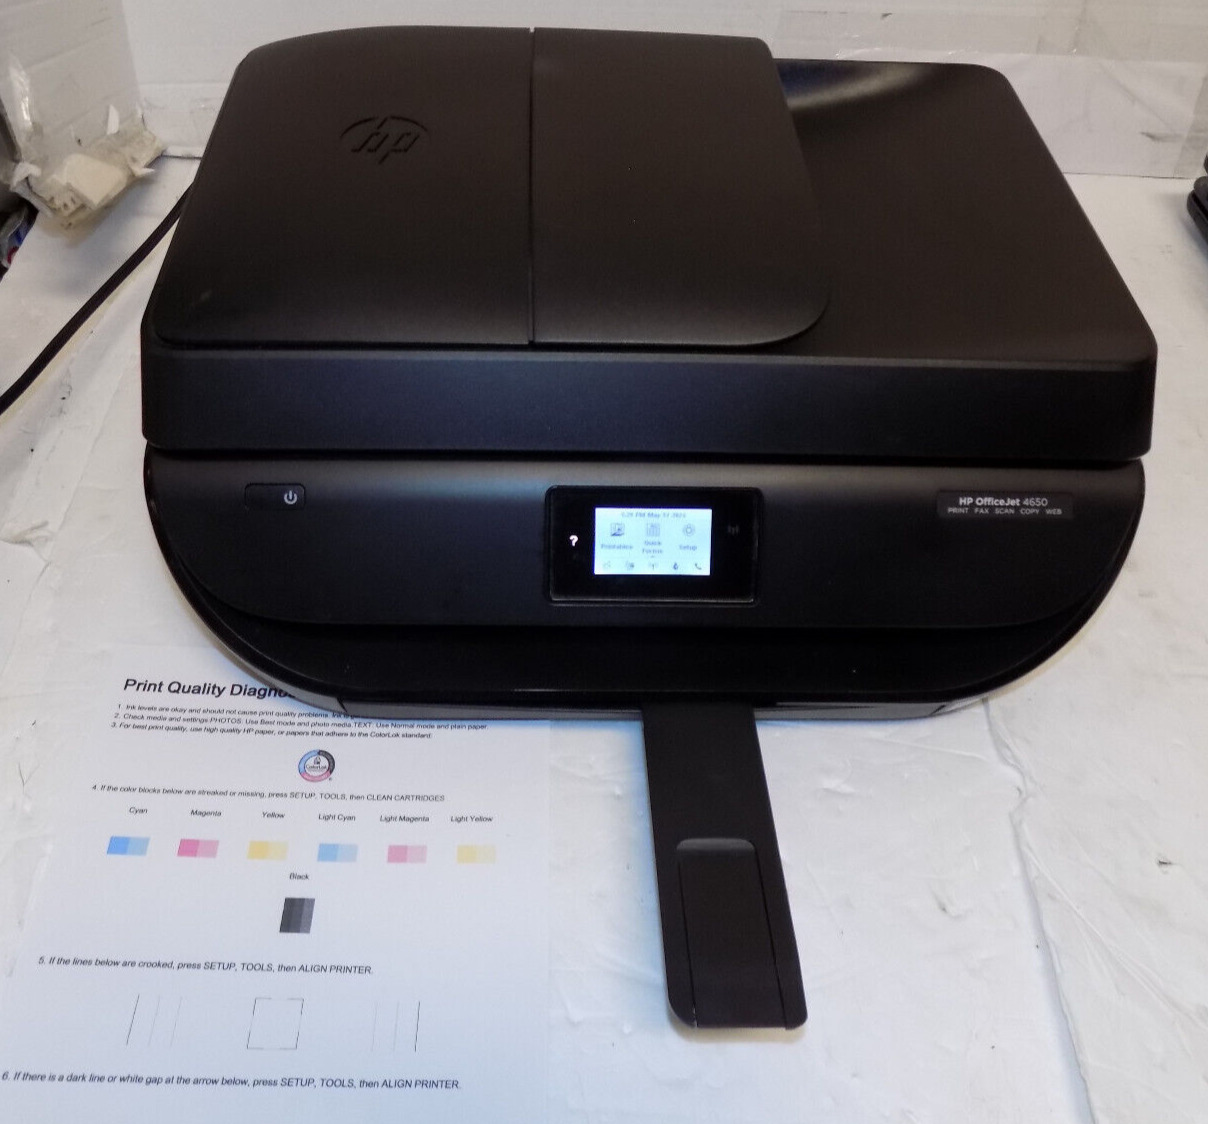 HP OfficeJet 4650 All-in-One Wireless Inkjet Printer - VGC Tested